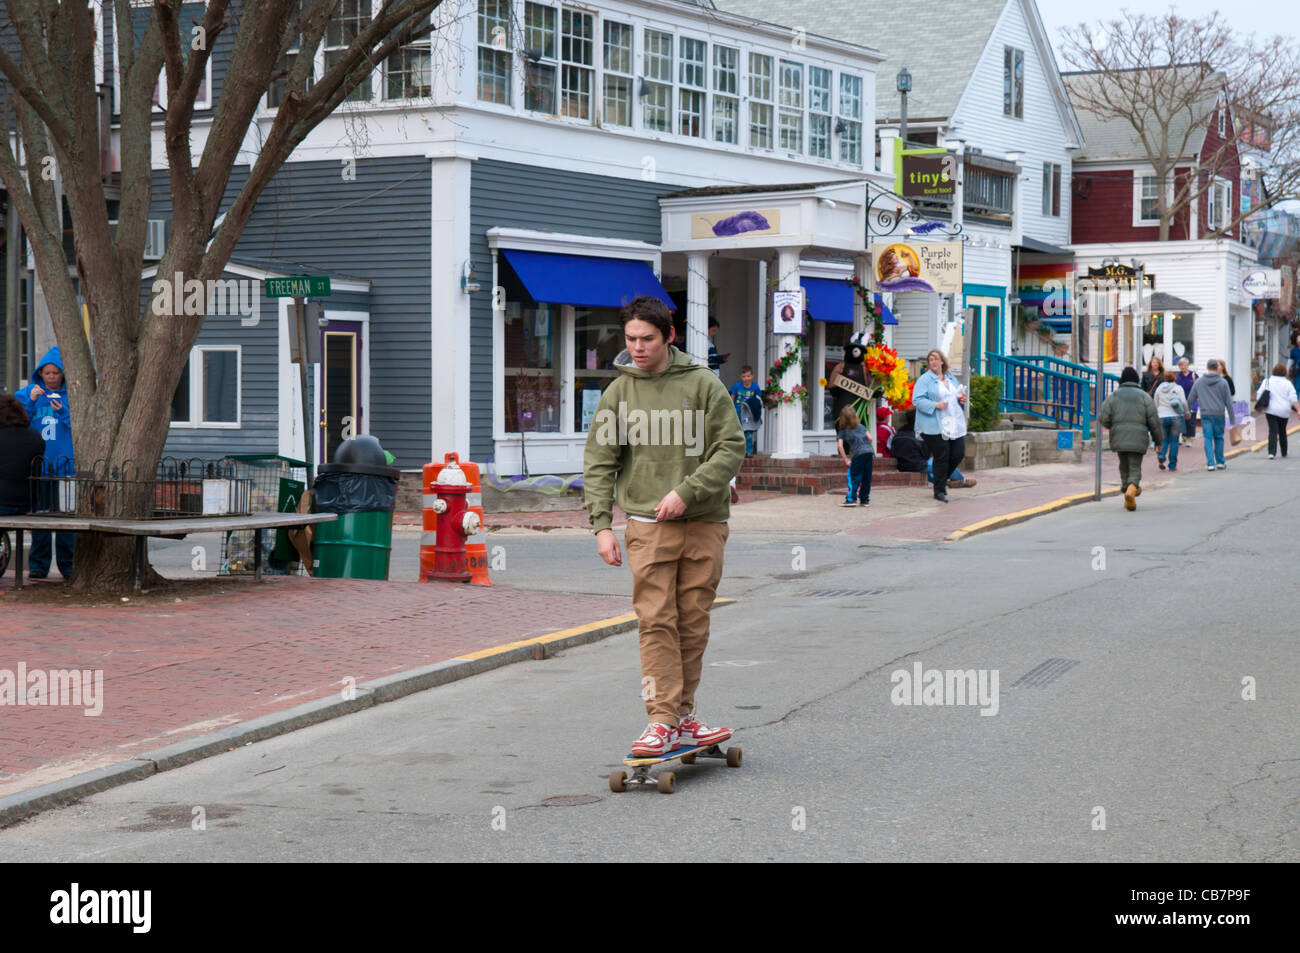 Teenager on skateboard in Provincetown, Cape Cod Stock Photo